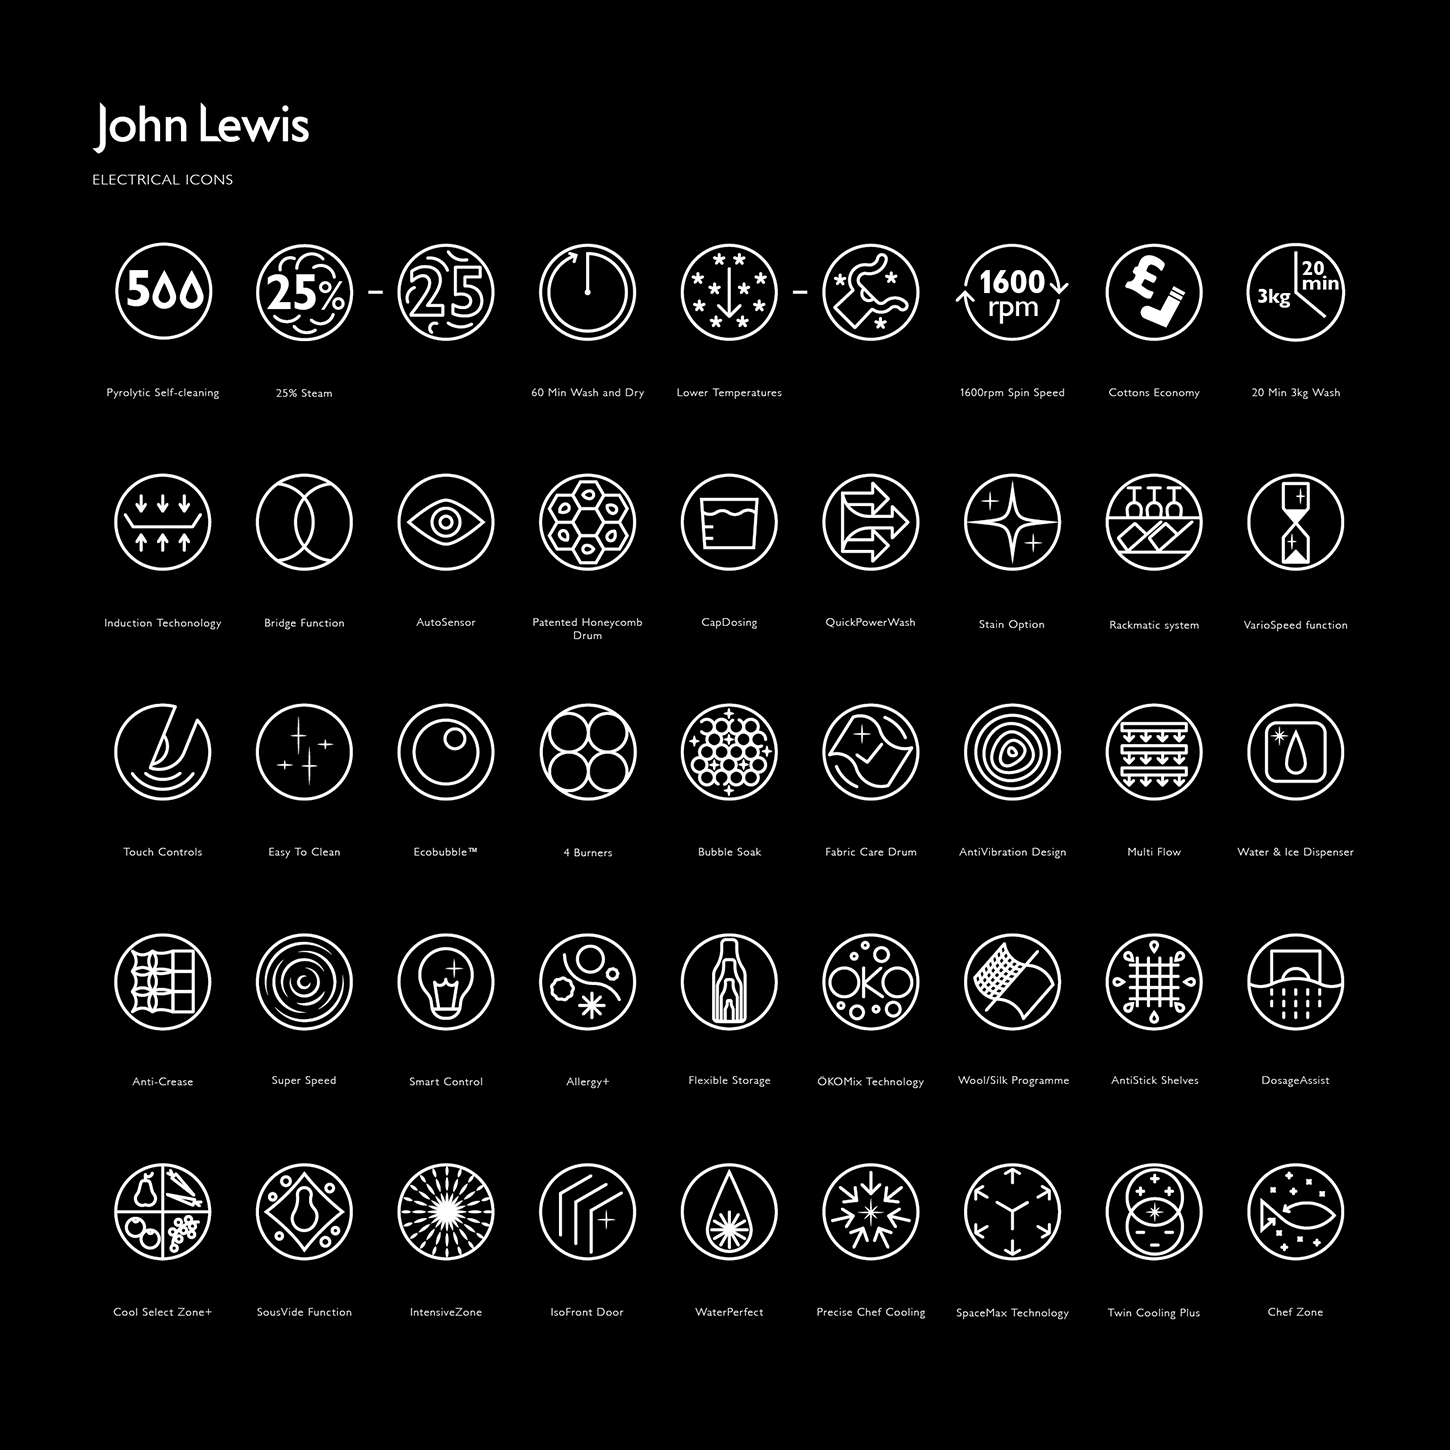 Icons for The Brand